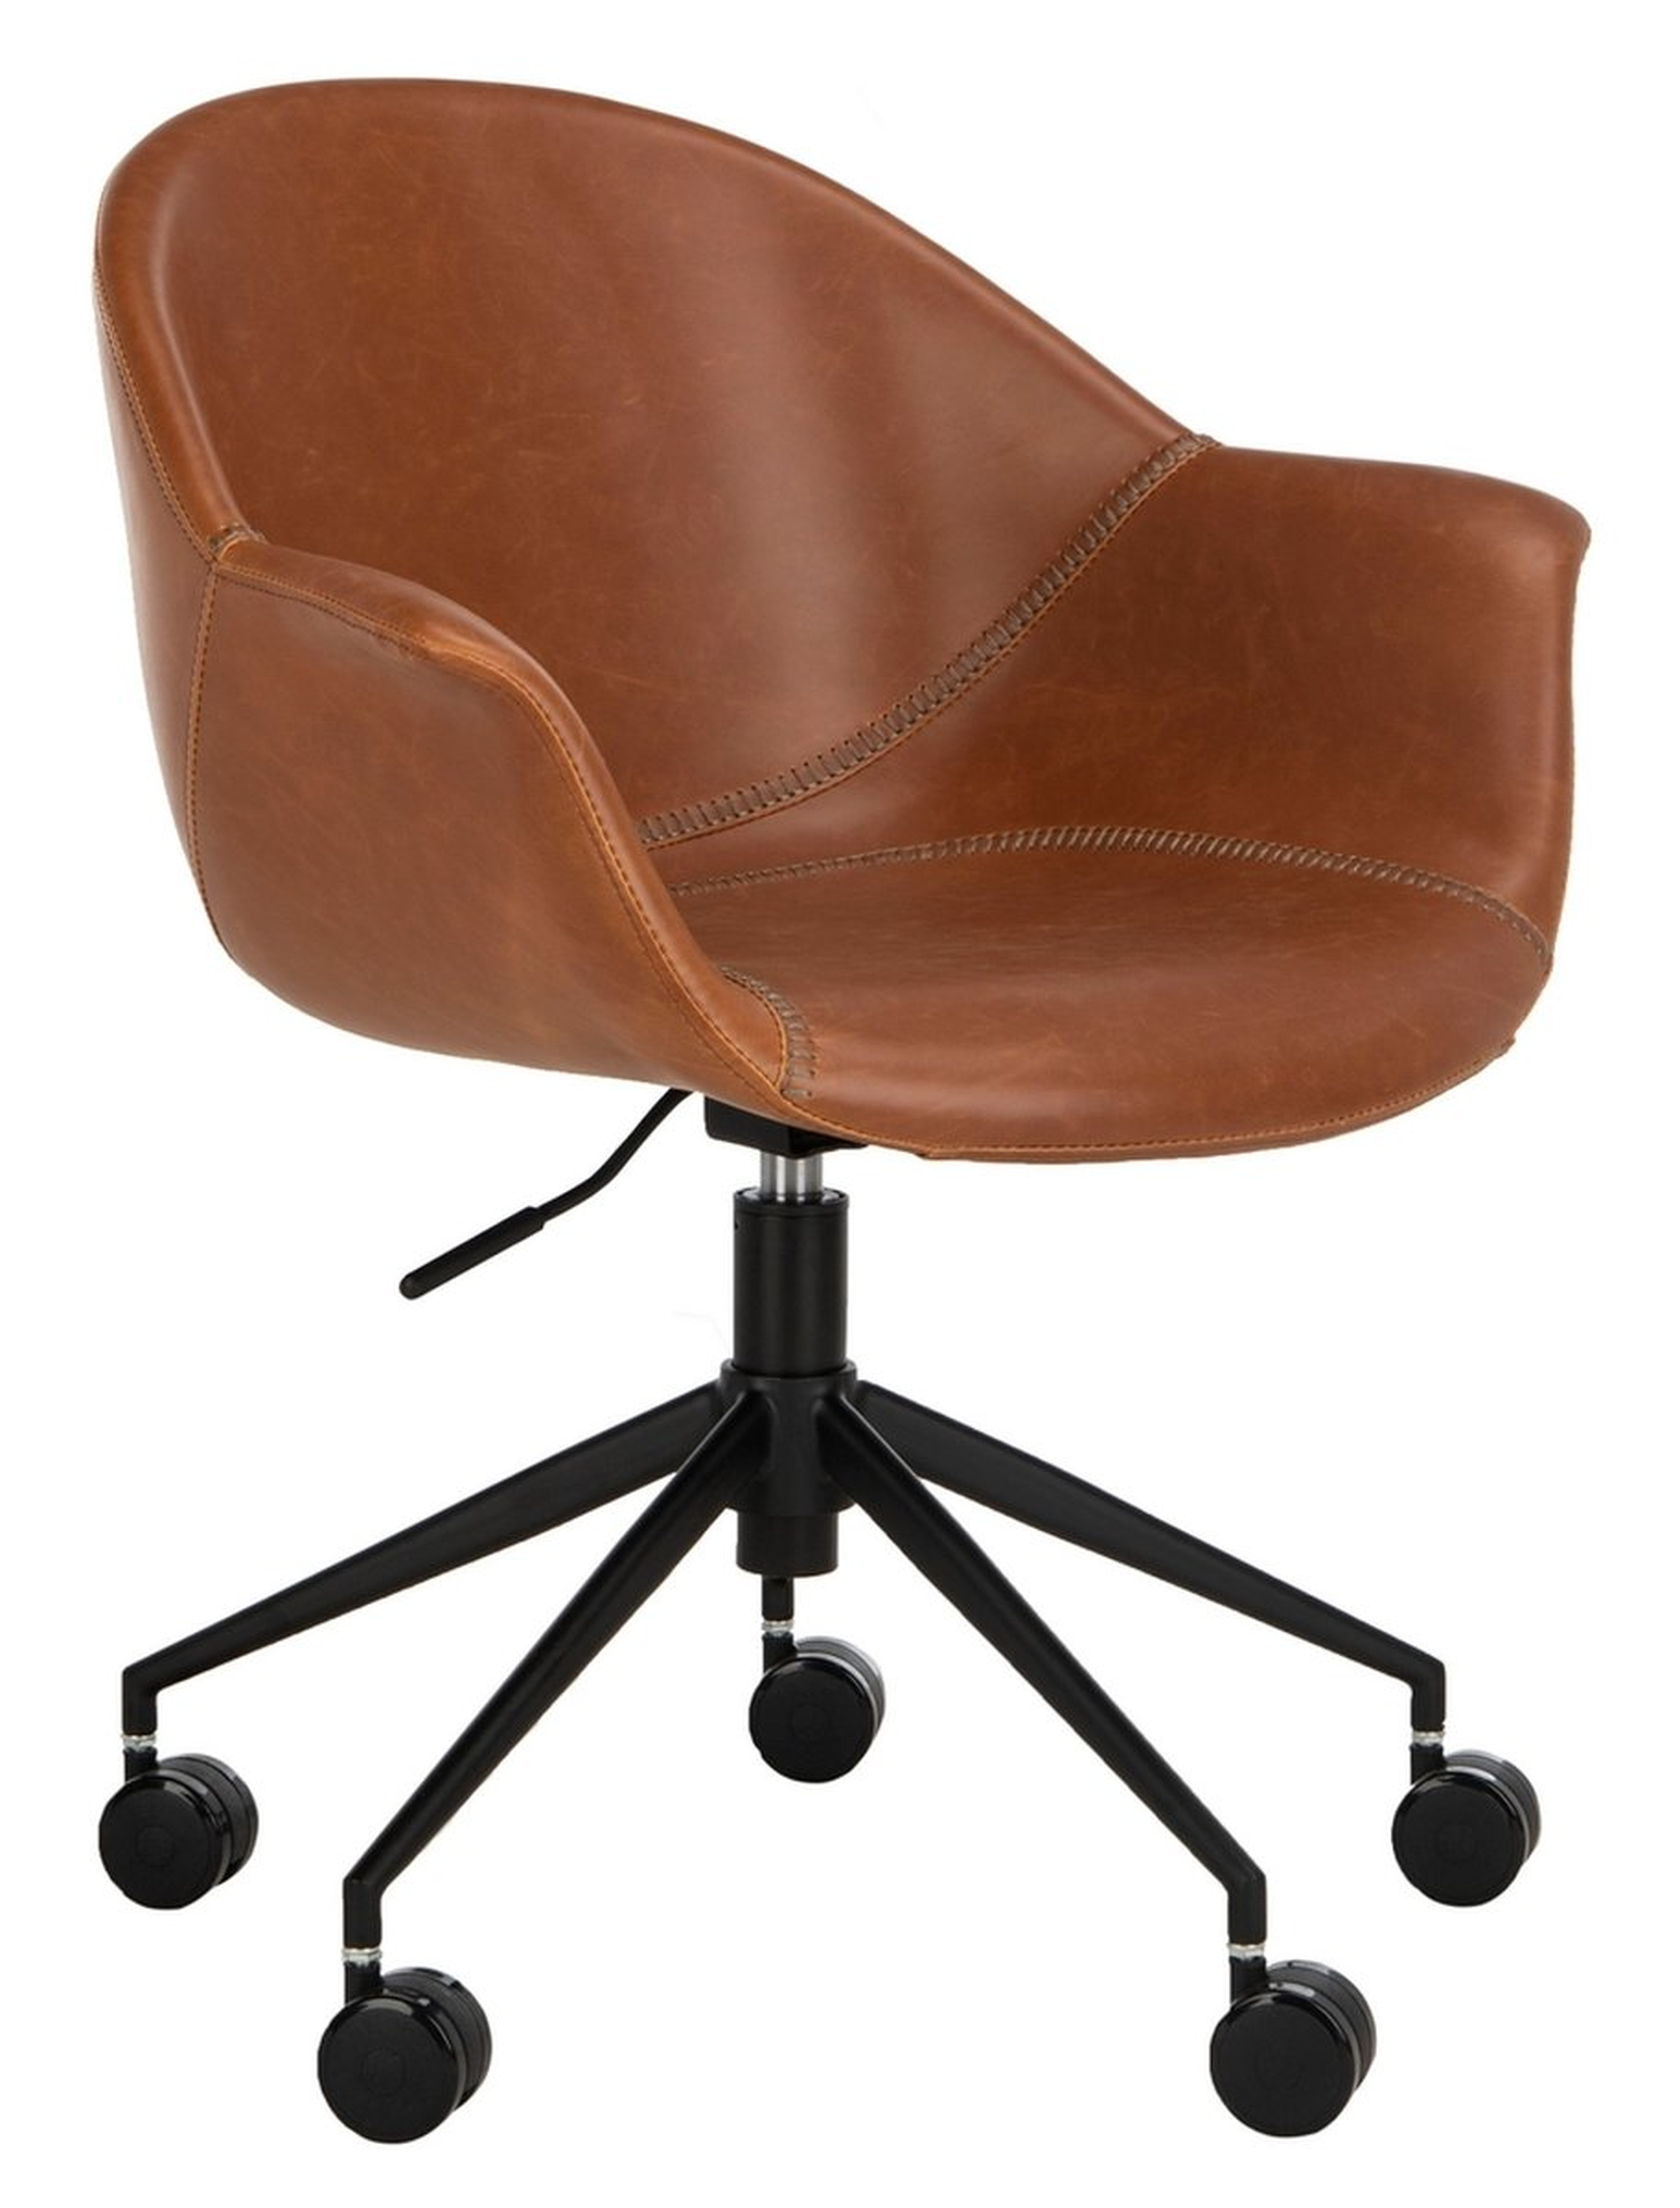 Ember Faux Leather Office Chair, Light Brown - Arlo Home